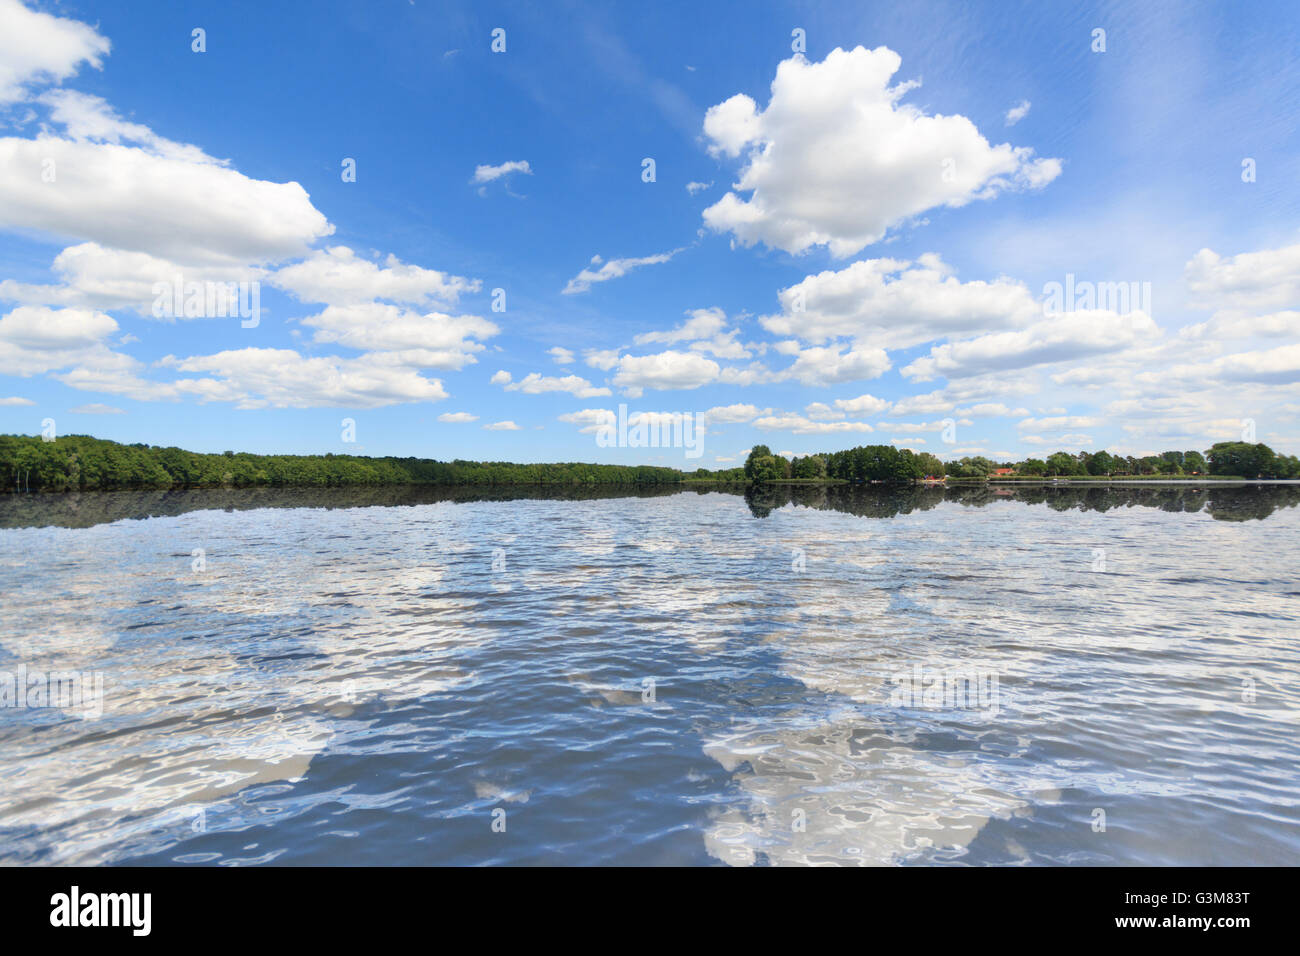 summer landscape, blue sky, clouds and water reflection Stock Photo